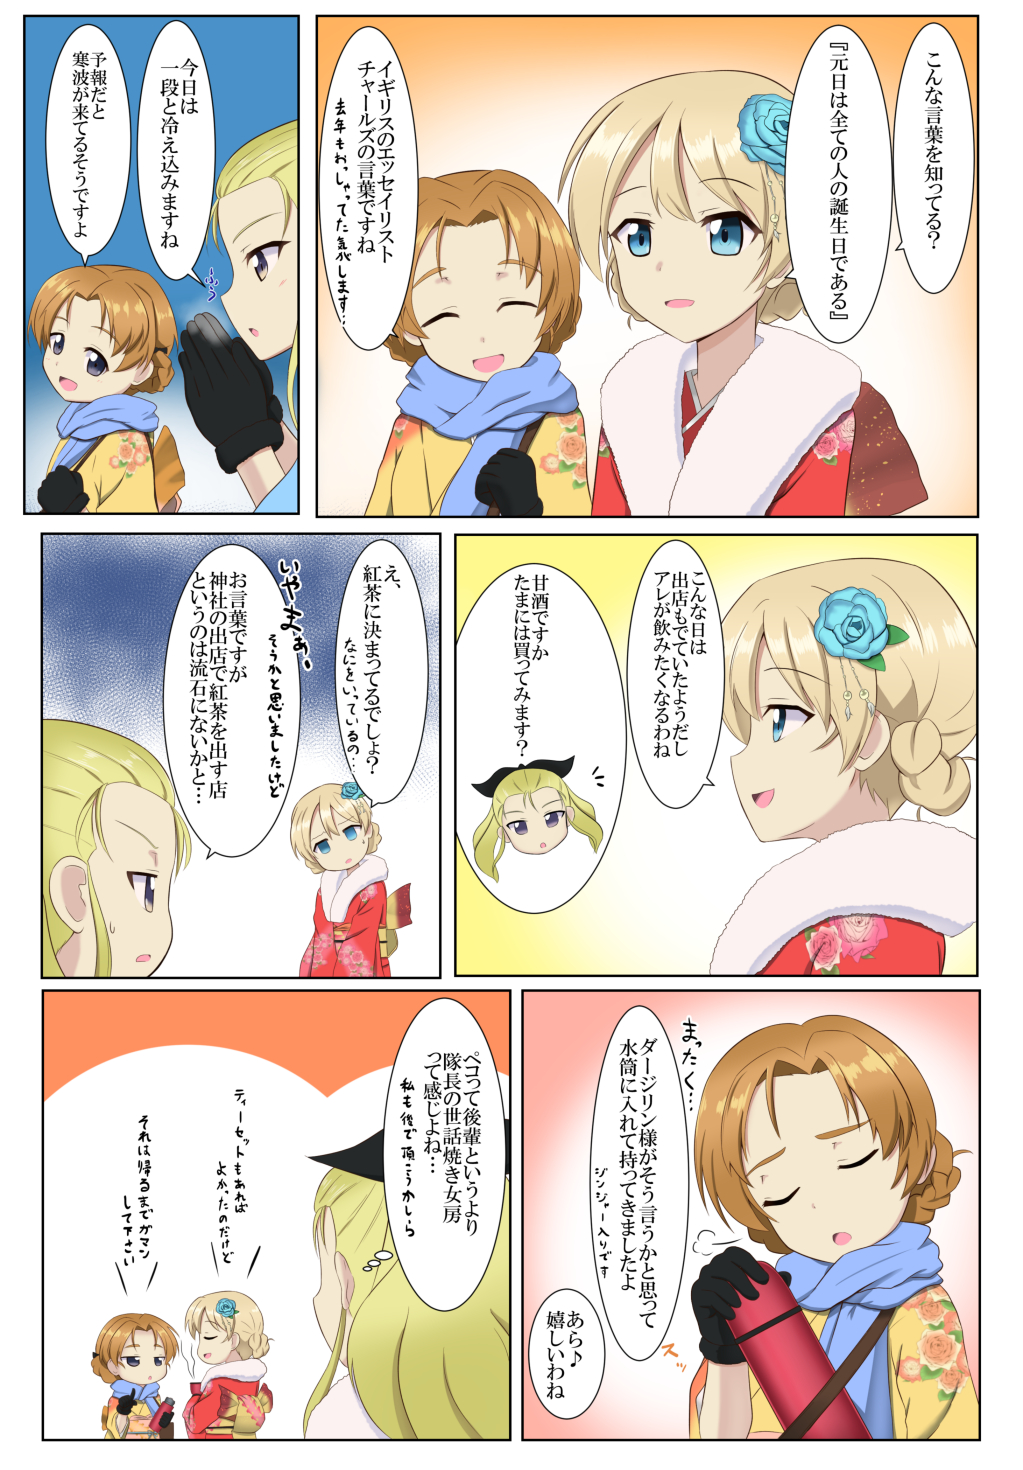 3girls =3 aozaku_(hatake_no_niku) assam_(girls_und_panzer) bangs black_gloves black_ribbon blonde_hair blue_eyes blue_scarf braid breath closed_eyes commentary cup darjeeling_(girls_und_panzer) floral_print flower frown fur_scarf furisode girls_und_panzer gloves hair_flower hair_ornament hair_pulled_back hair_ribbon hatsumoude head_tilt highres holding holding_cup japanese_clothes jitome kimono long_hair looking_at_another multiple_girls new_year notice_lines obi open_mouth orange_hair orange_pekoe_(girls_und_panzer) parted_bangs print_kimono red_kimono ribbon sash scarf short_hair sigh smile steam sweatdrop thermos tied_hair translation_request twin_braids yellow_kimono